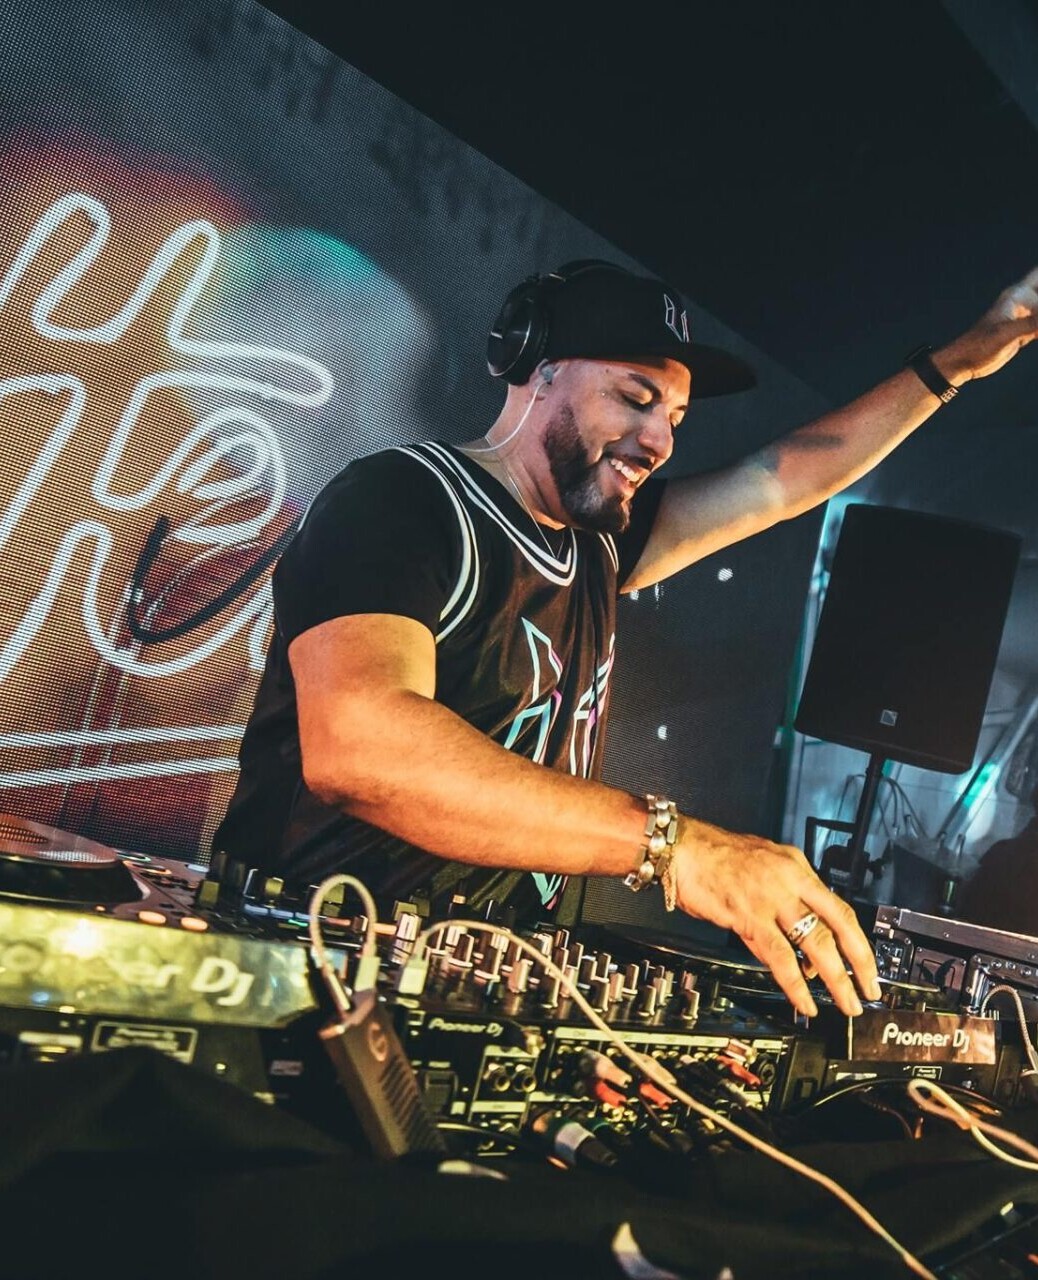 Release Yourself #1179 – Roger Sanchez Live In The Mix From Magic Break Festival, Antalya, Turkey (AUDIO)